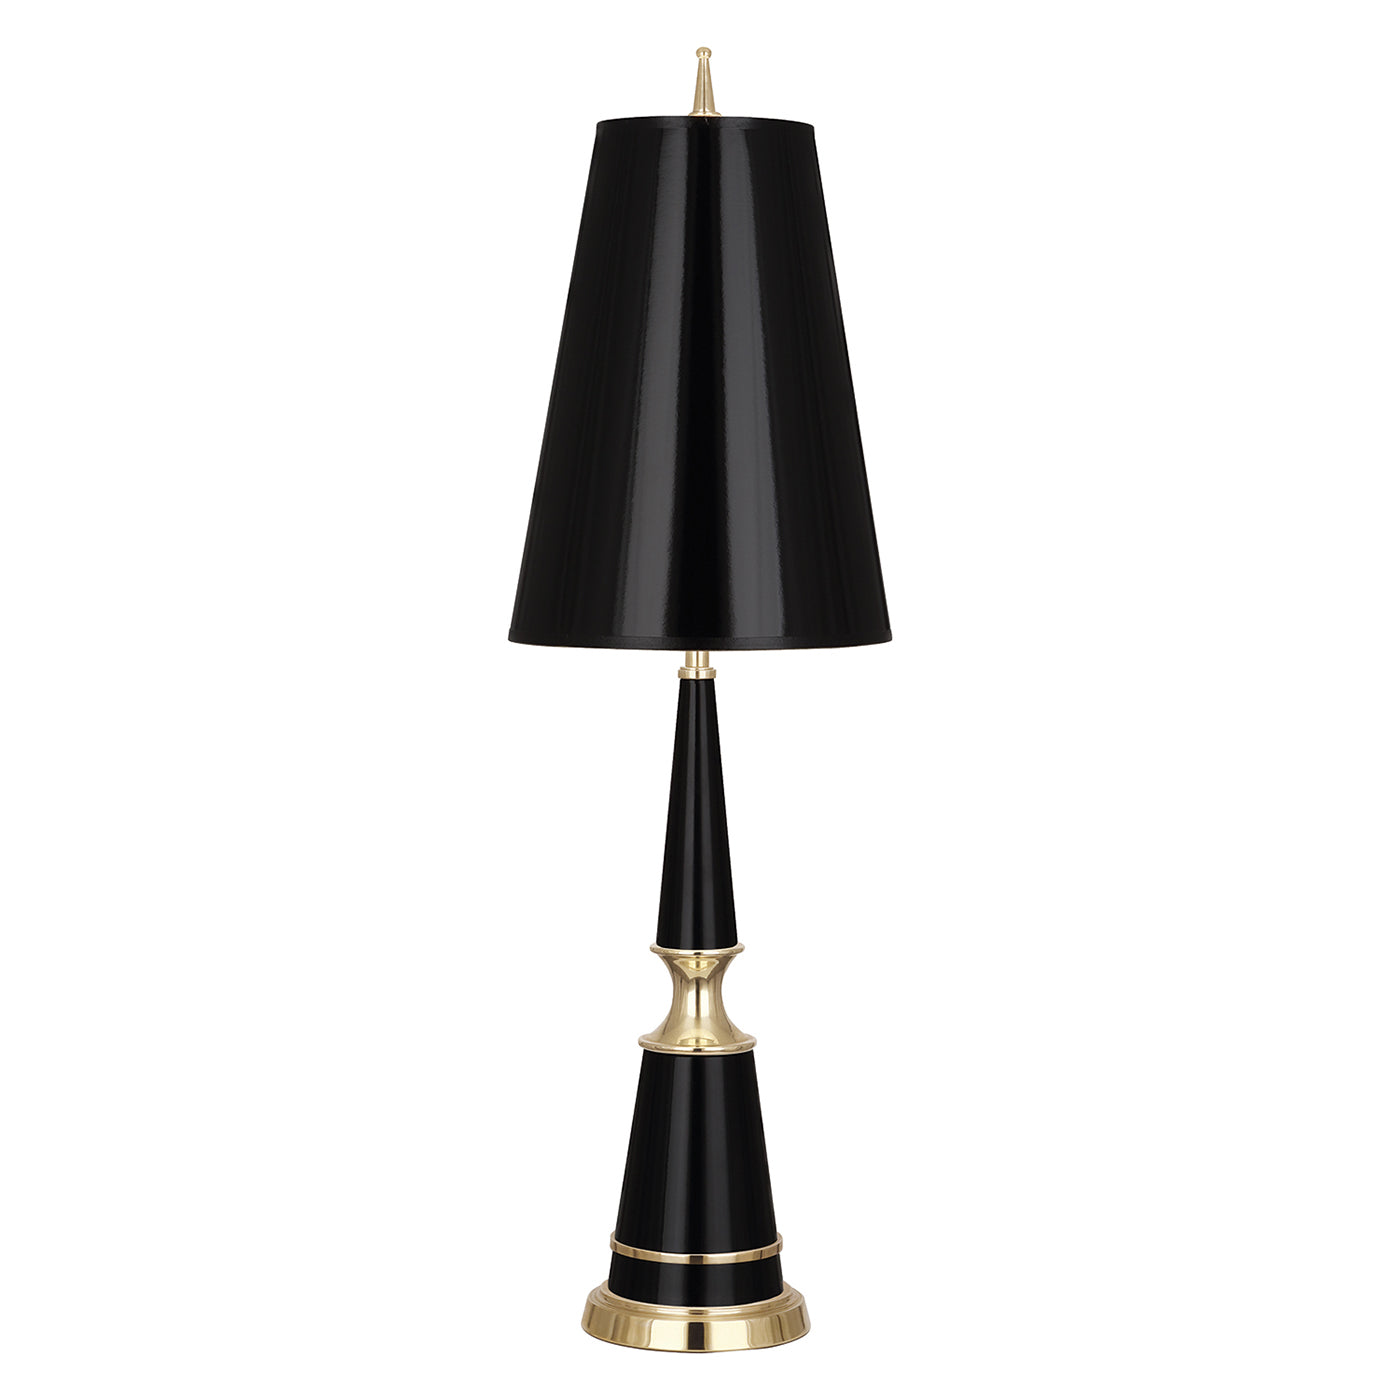 Load image into Gallery viewer, Versailles Table Lamp With Painted Shade BlackTable Lamp Jonathan Adler  Black   Four Hands, Burke Decor, Mid Century Modern Furniture, Old Bones Furniture Company, Old Bones Co, Modern Mid Century, Designer Furniture, https://www.oldbonesco.com/
